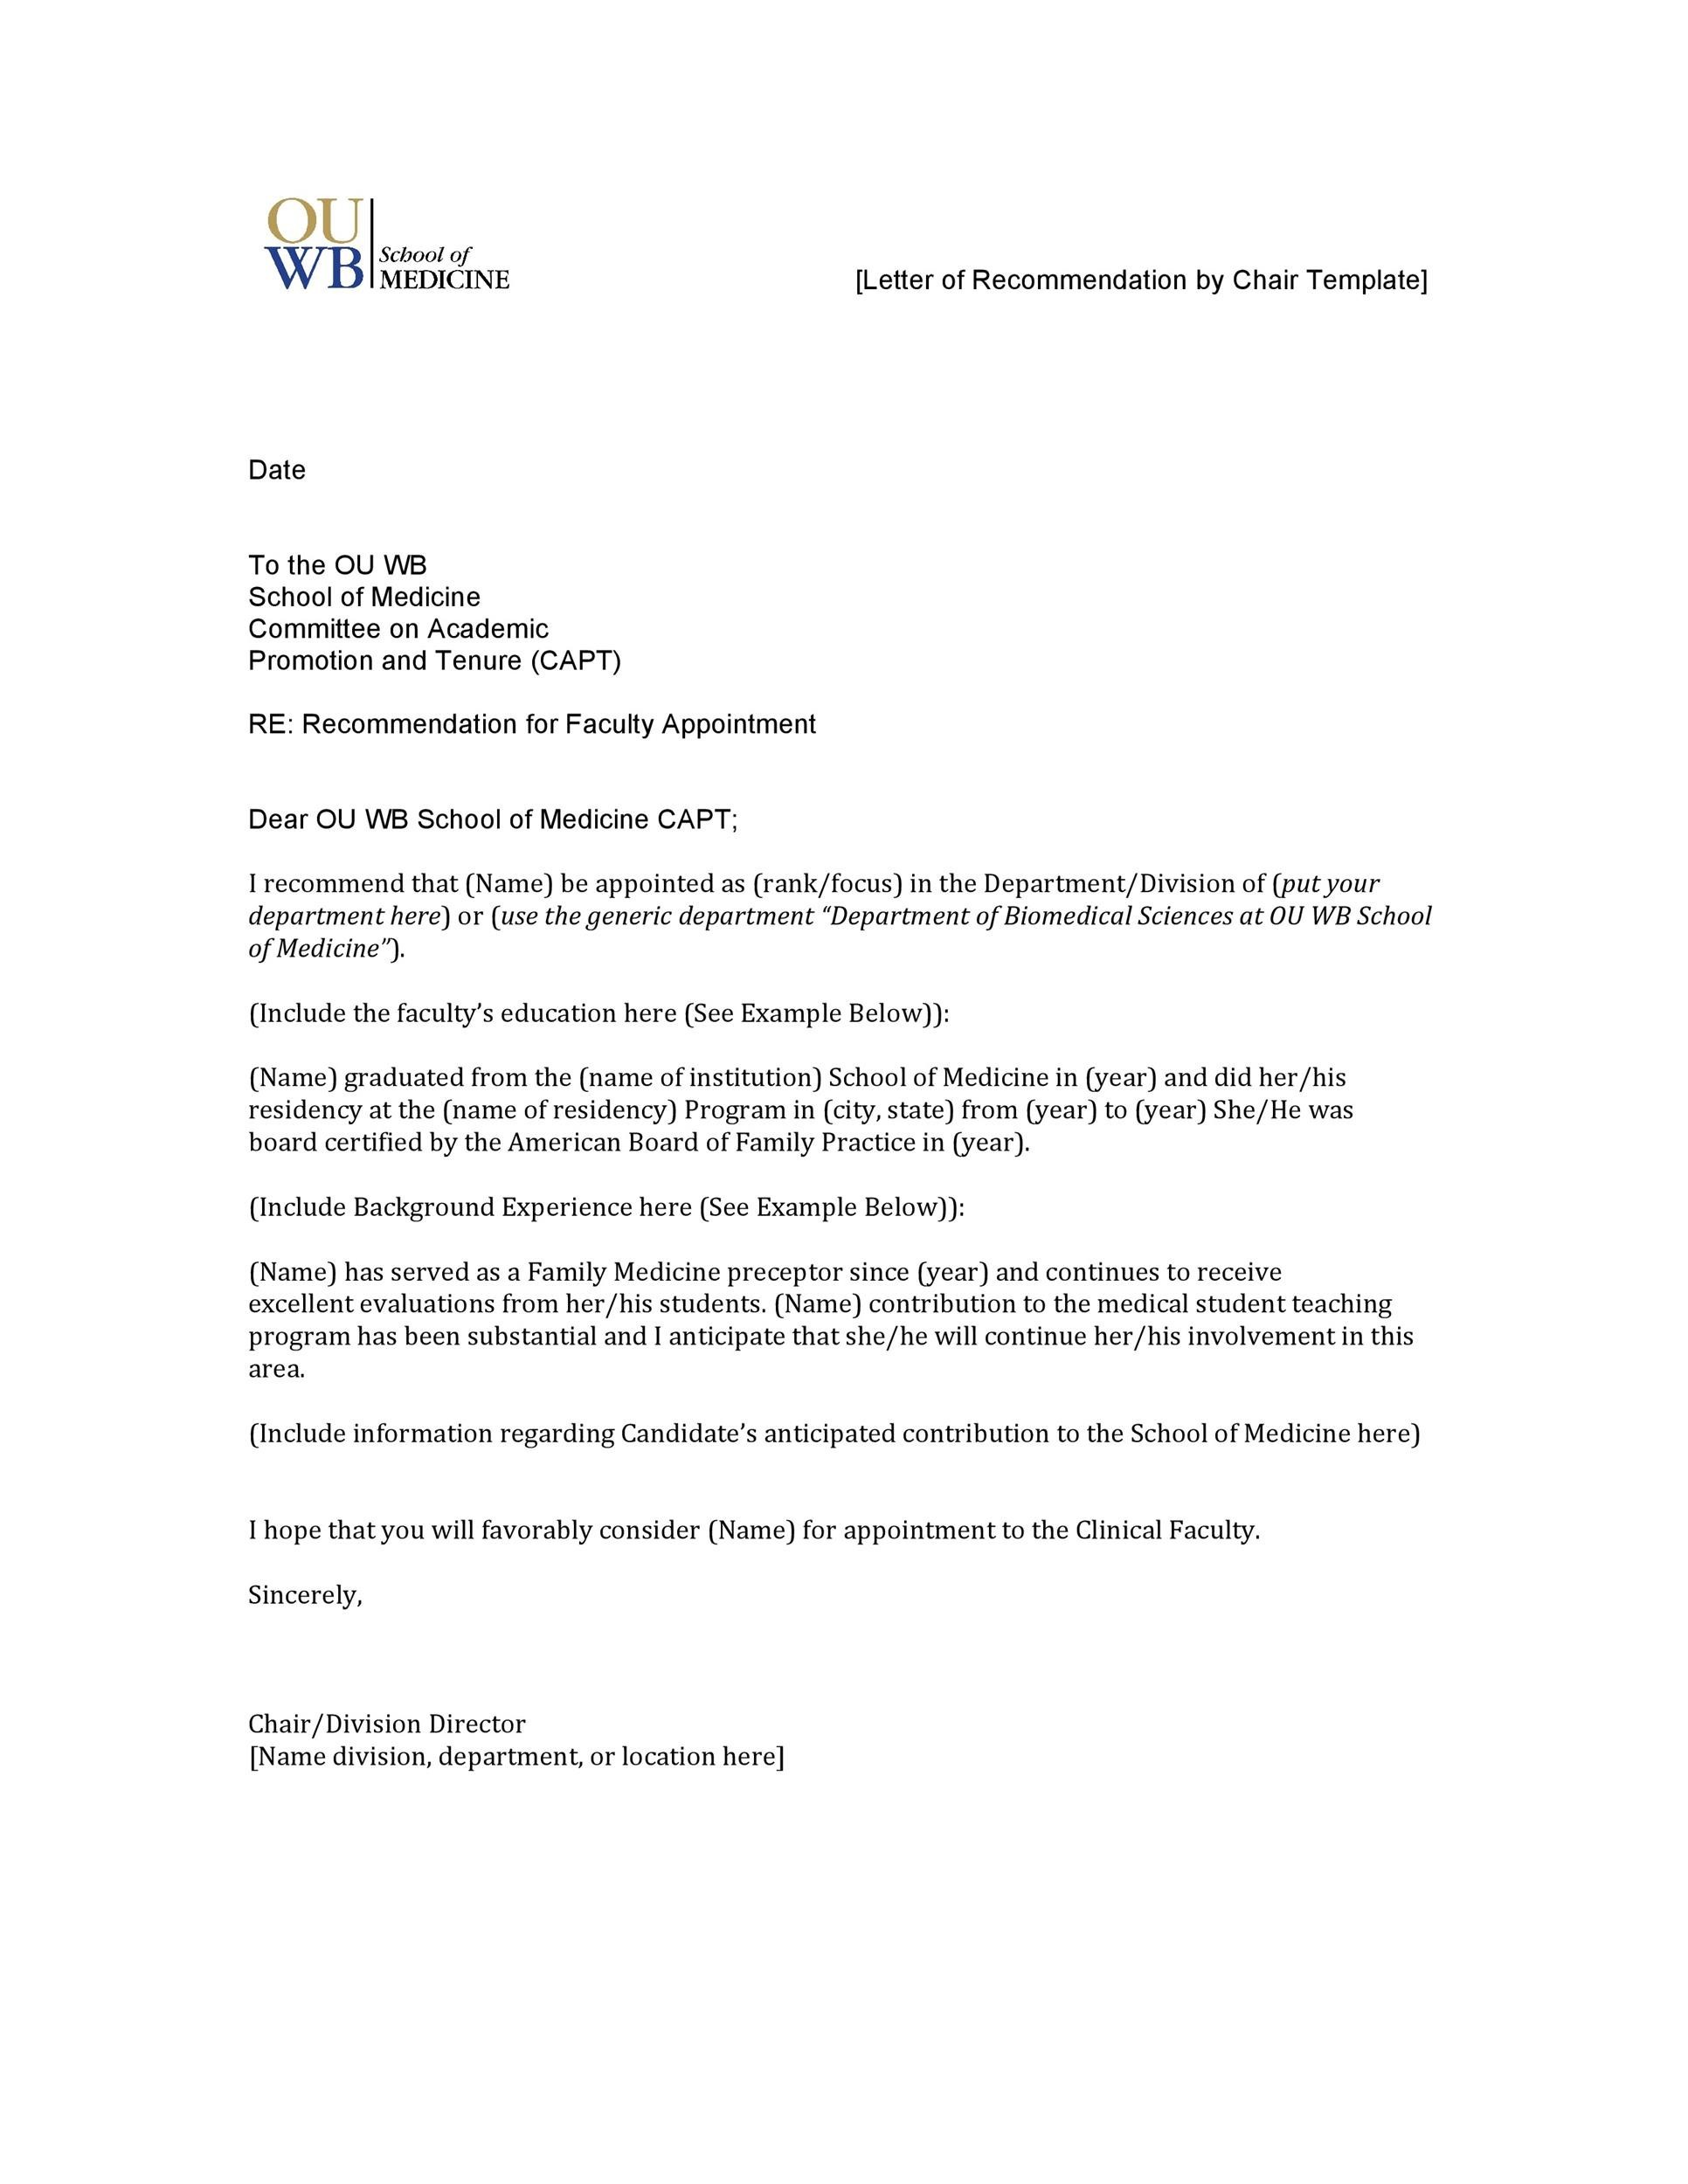 Emigrate or immigrate: Recommendation letter Within Letter Of Recomendation Template